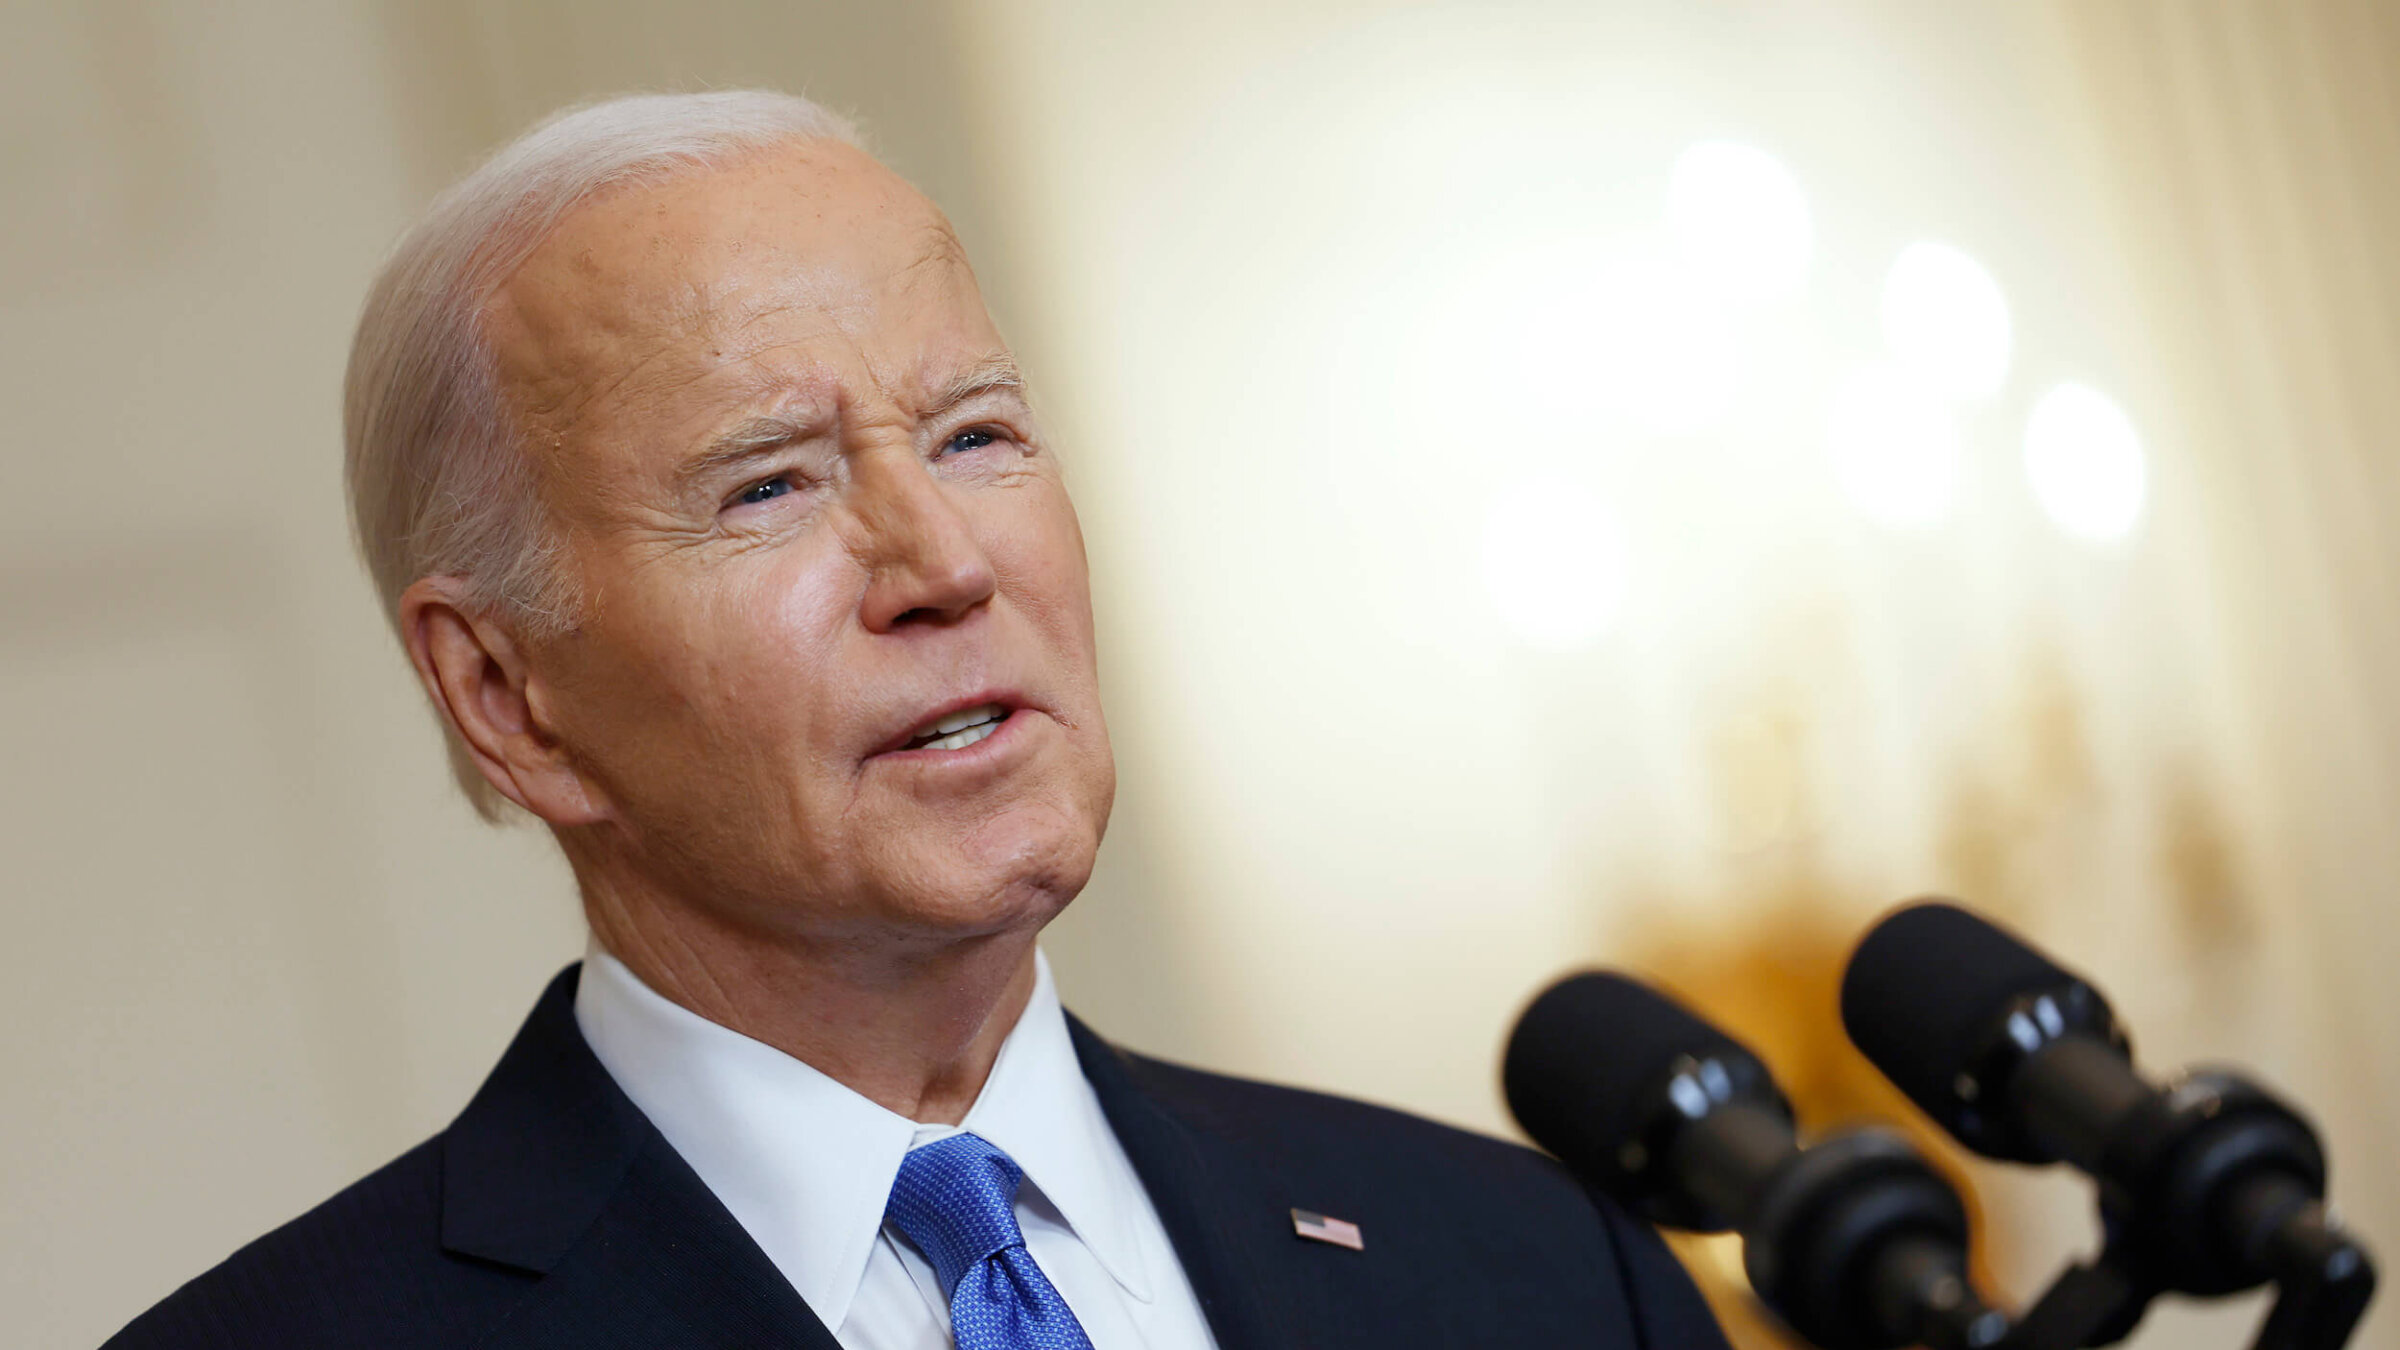 President Joe Biden has met major backlash over his support for Israel through war. Are things about to change?